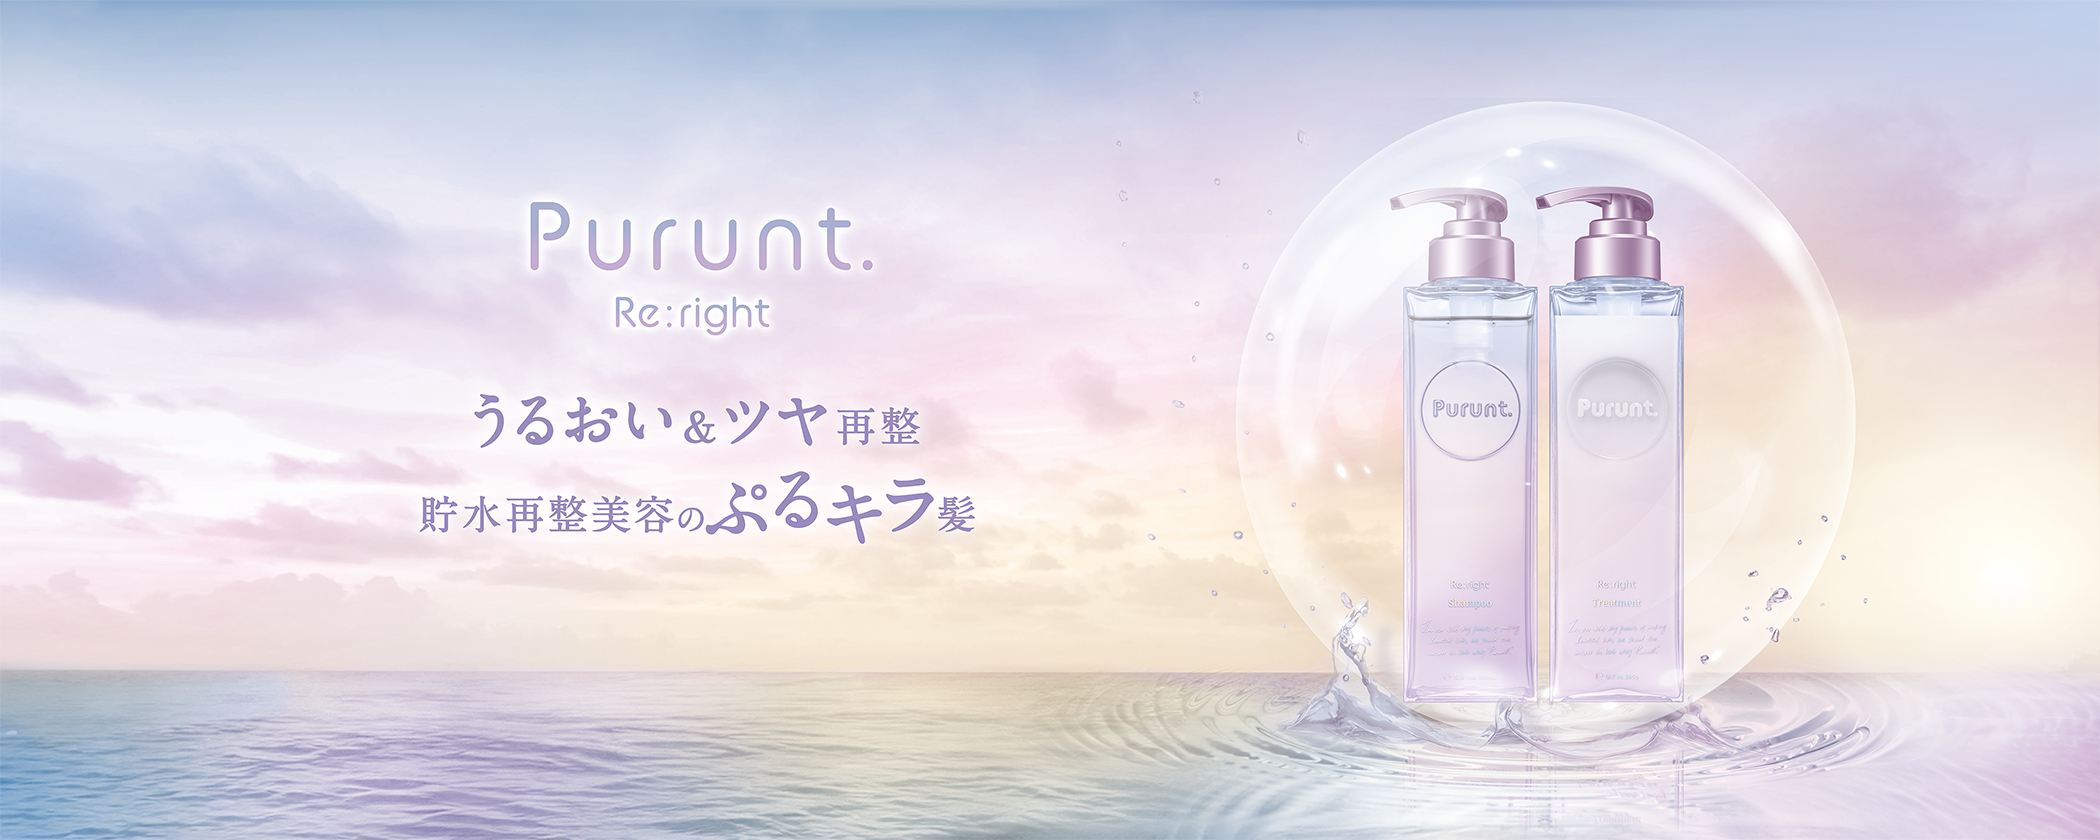 Purunt,Re:right,リライト,プルント